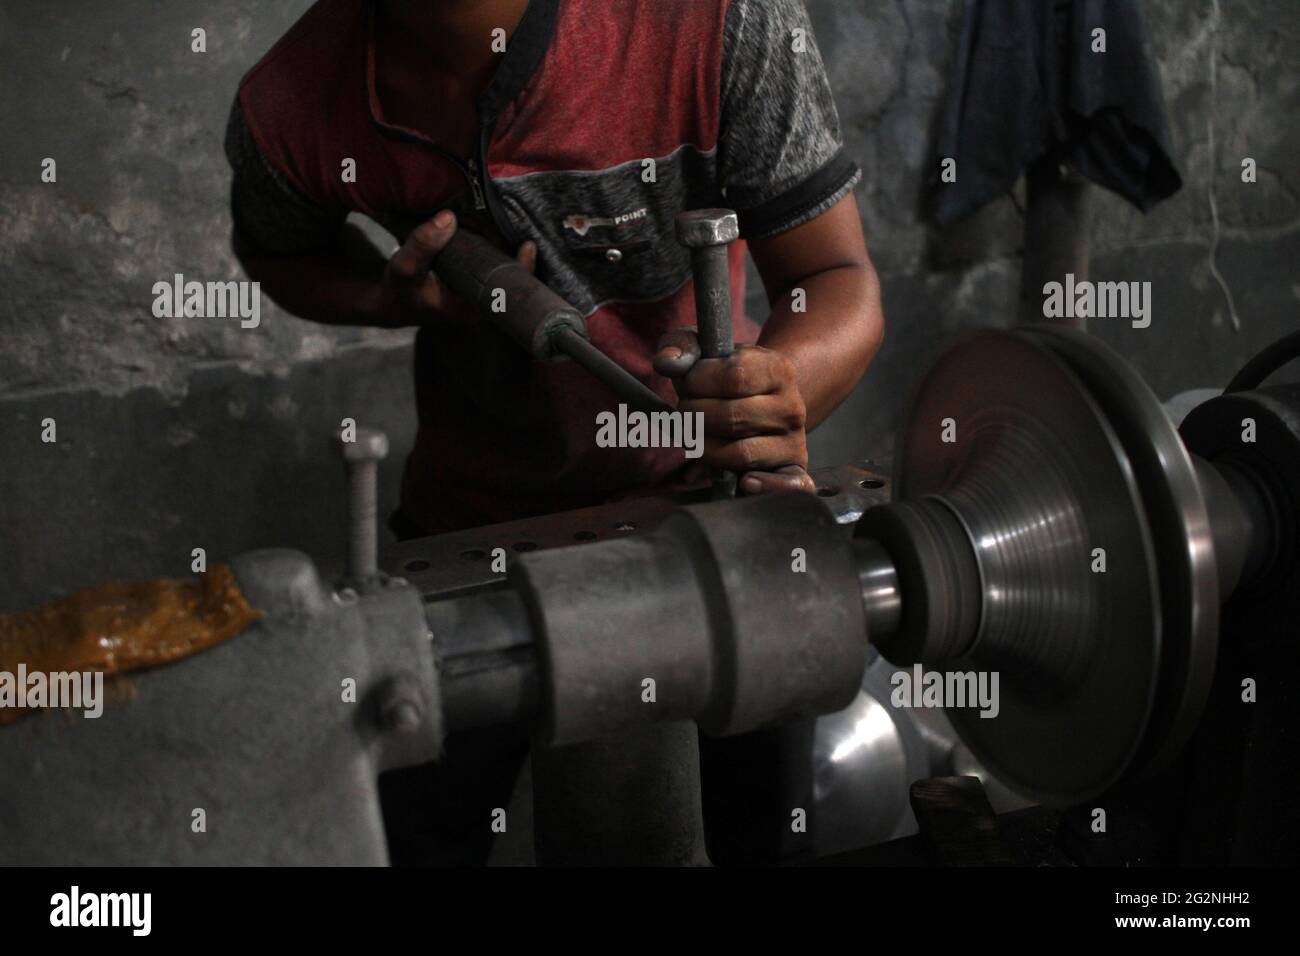 June 12 21 Dhaka Dhaka Bangladesh Child Labor Are Works In A Silver Cooking Pot Manufacturing Factory In Dhaka Bangladesh On June 12 21 In This Type Of Aluminum Factories Around 30 50 Employ